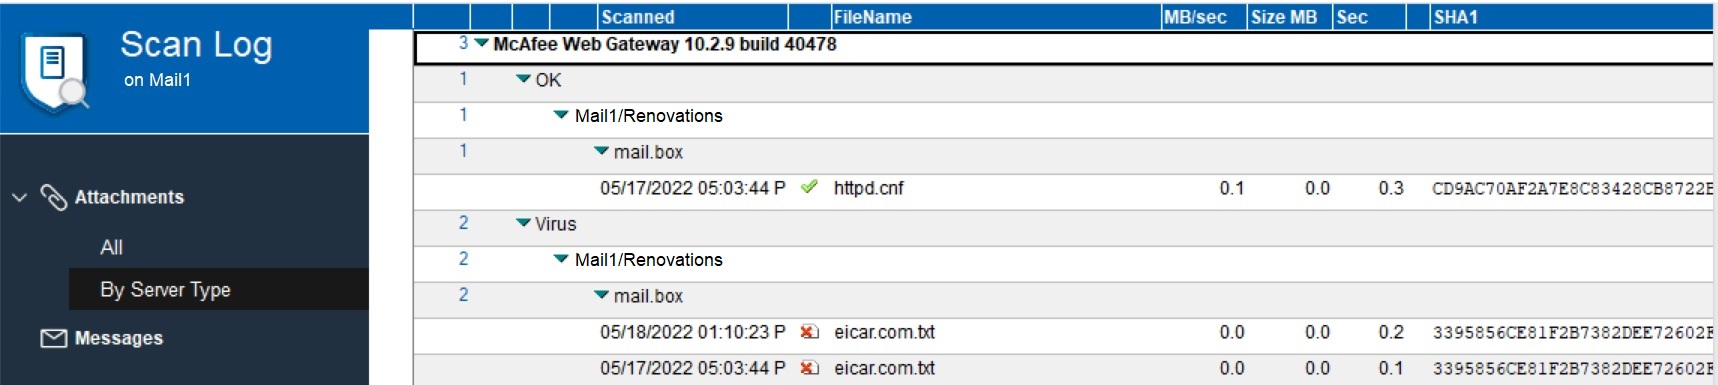 By Server Type view of scan log for Mail1/Renovations